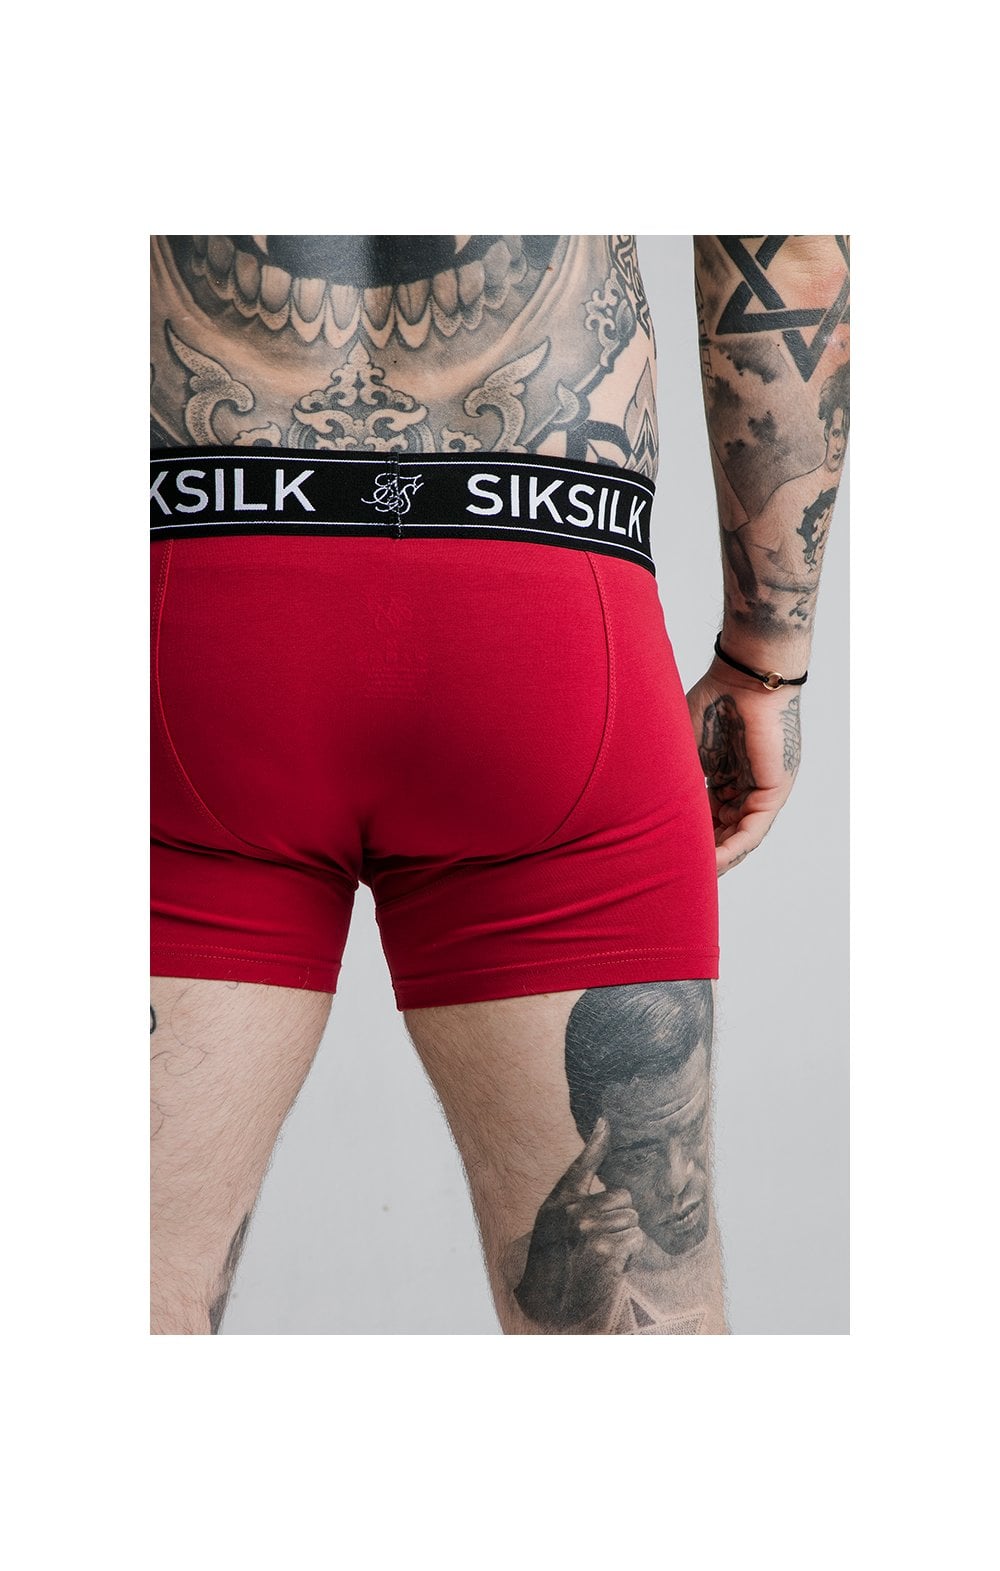 SikSilk Boxer Shorts (2 Pack)  - Red & Navy (6)